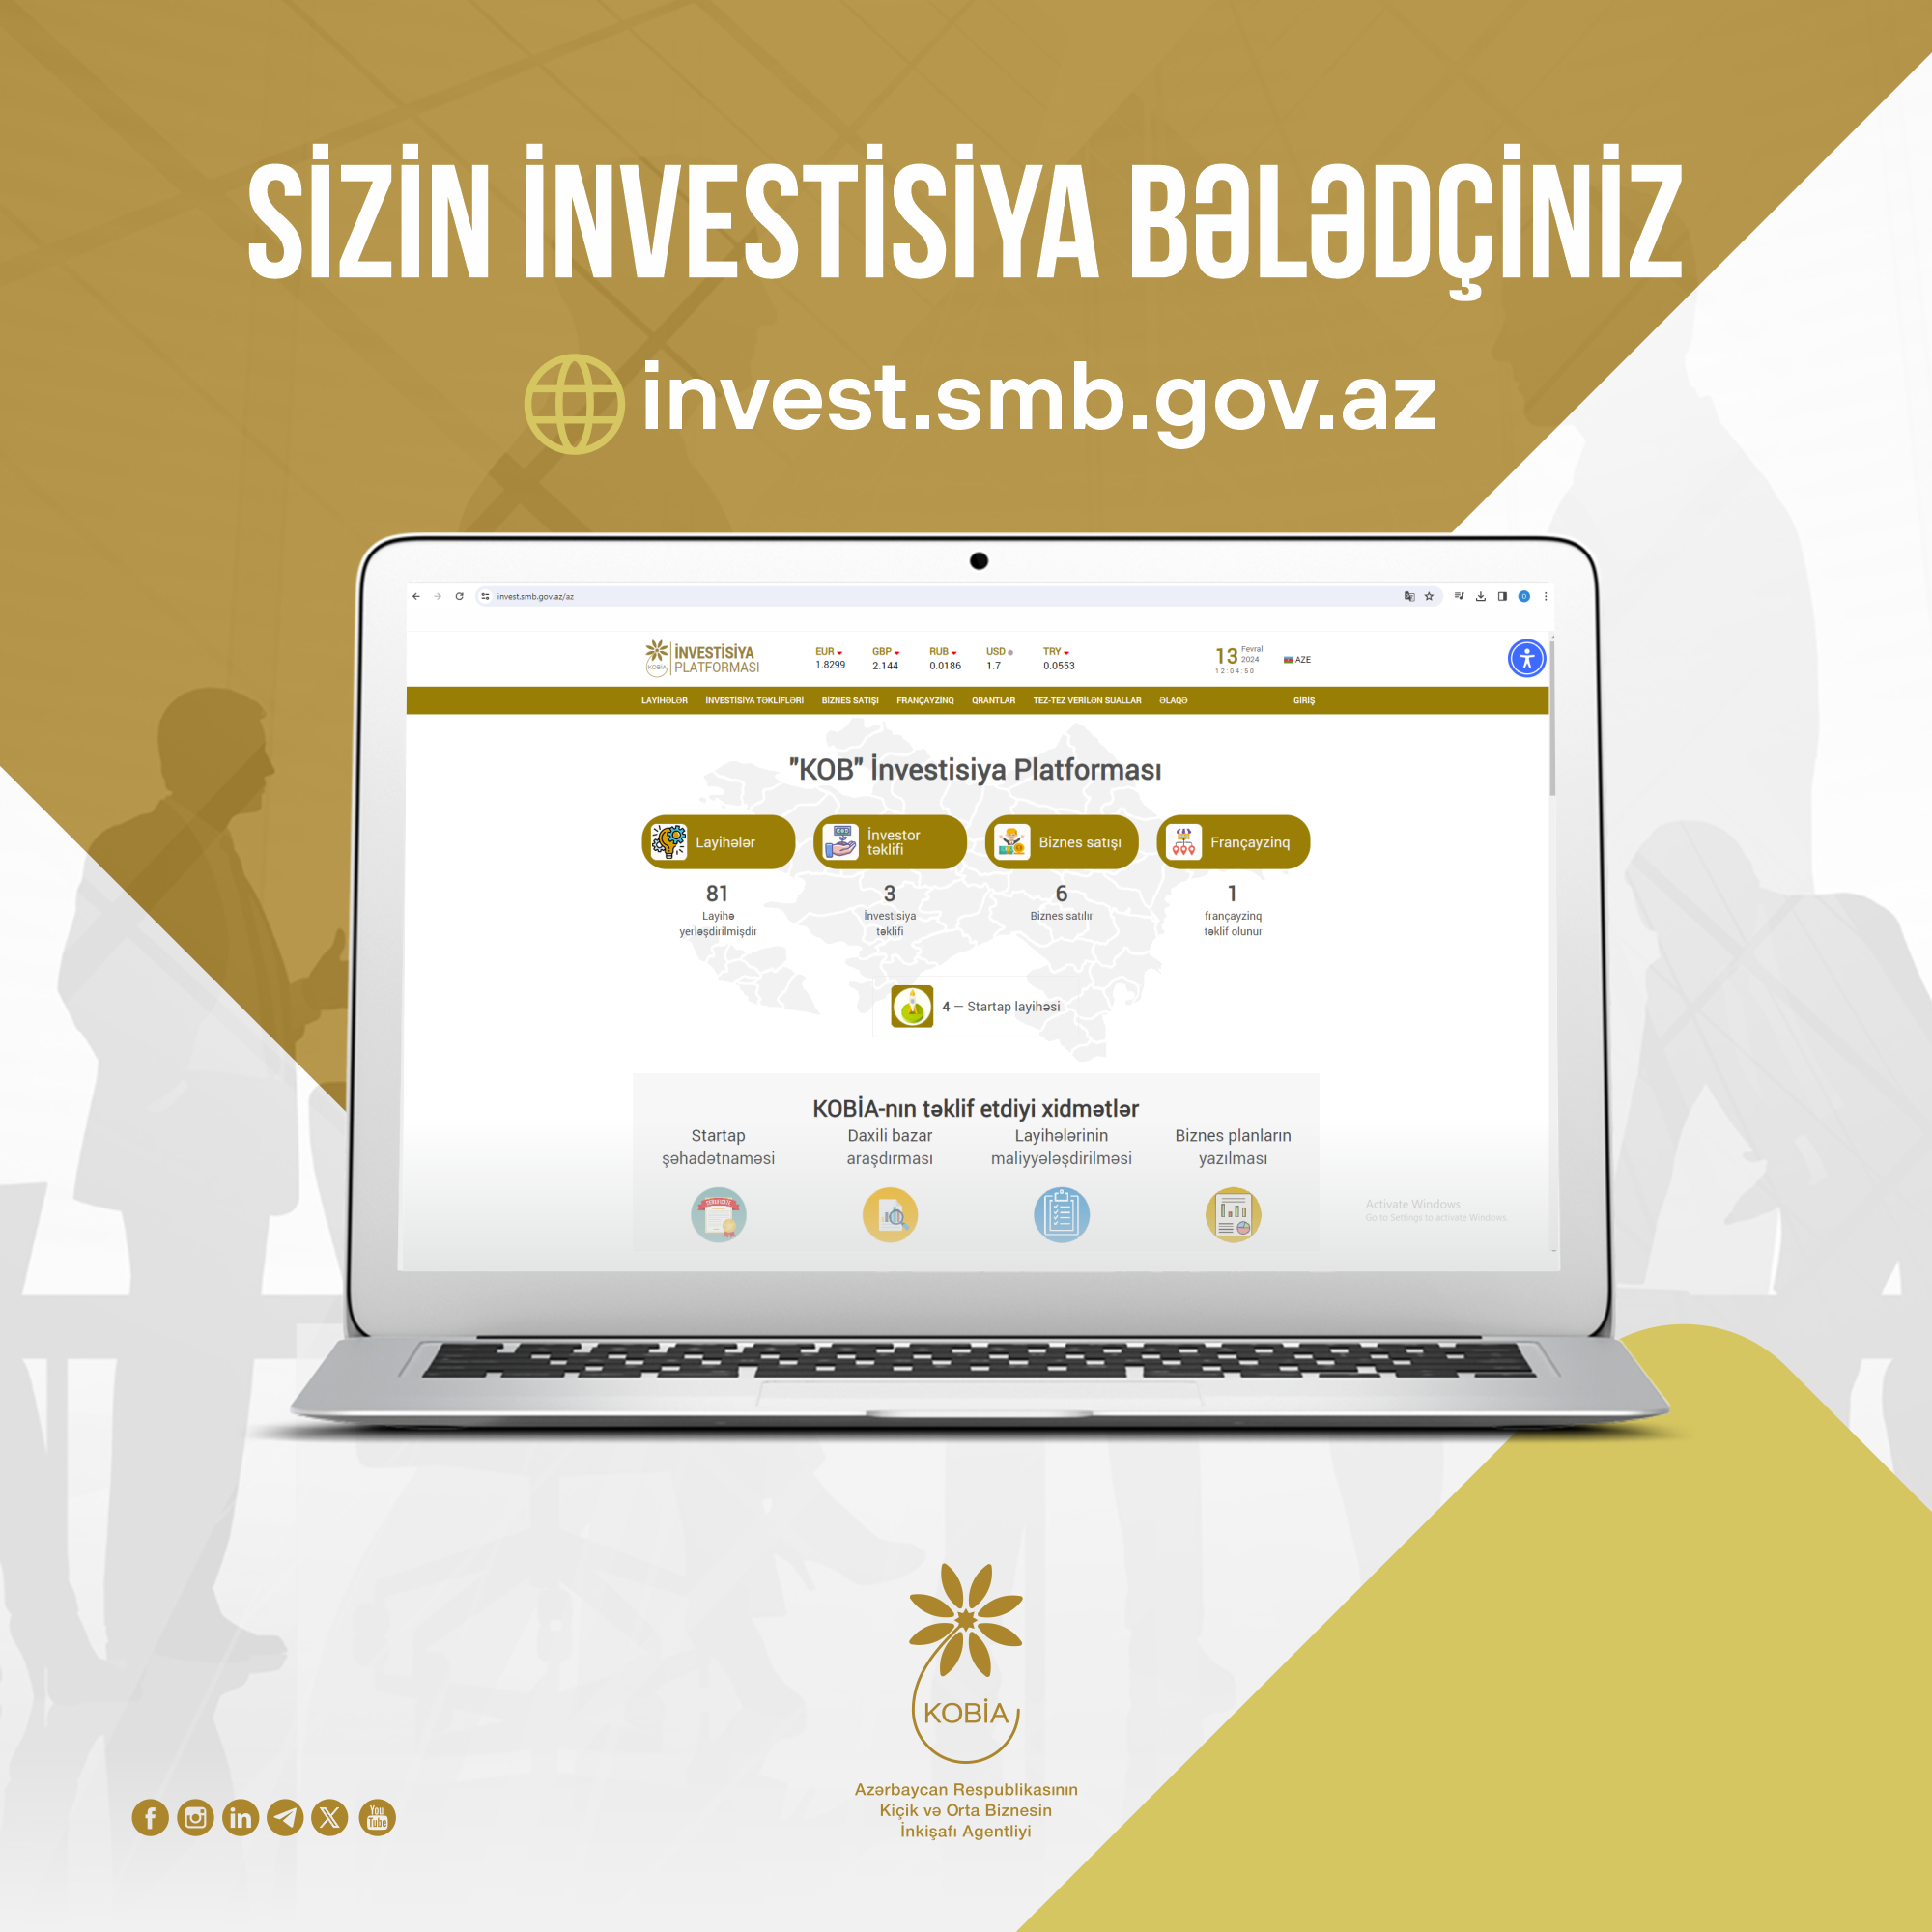 More than 80 projects have been placed on the investment portal by entrepreneurs for financing